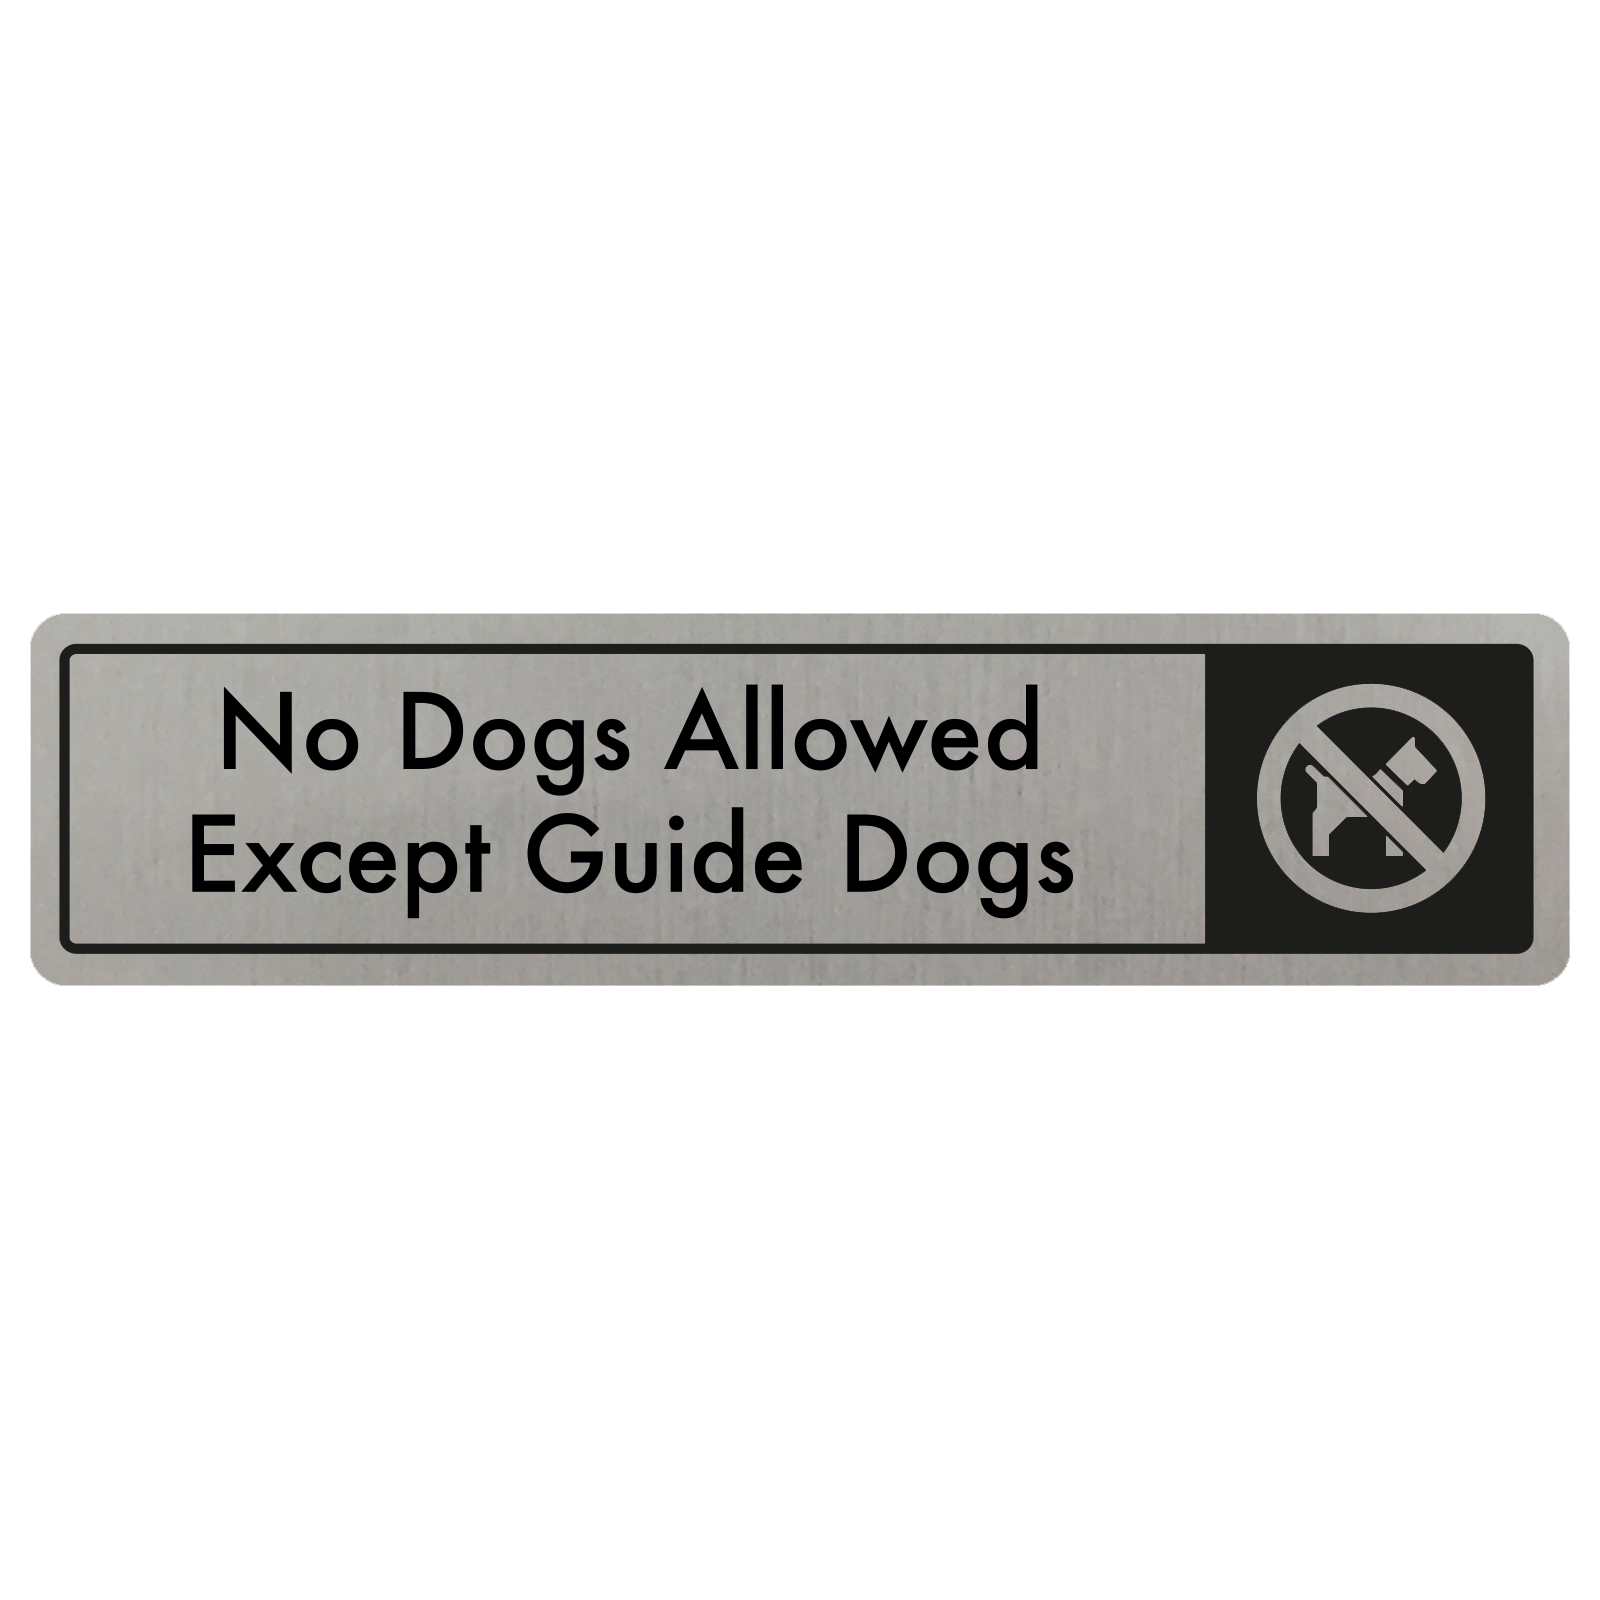 No Dogs Allowed, Except Guide Dogs Door Sign - Black on Silver